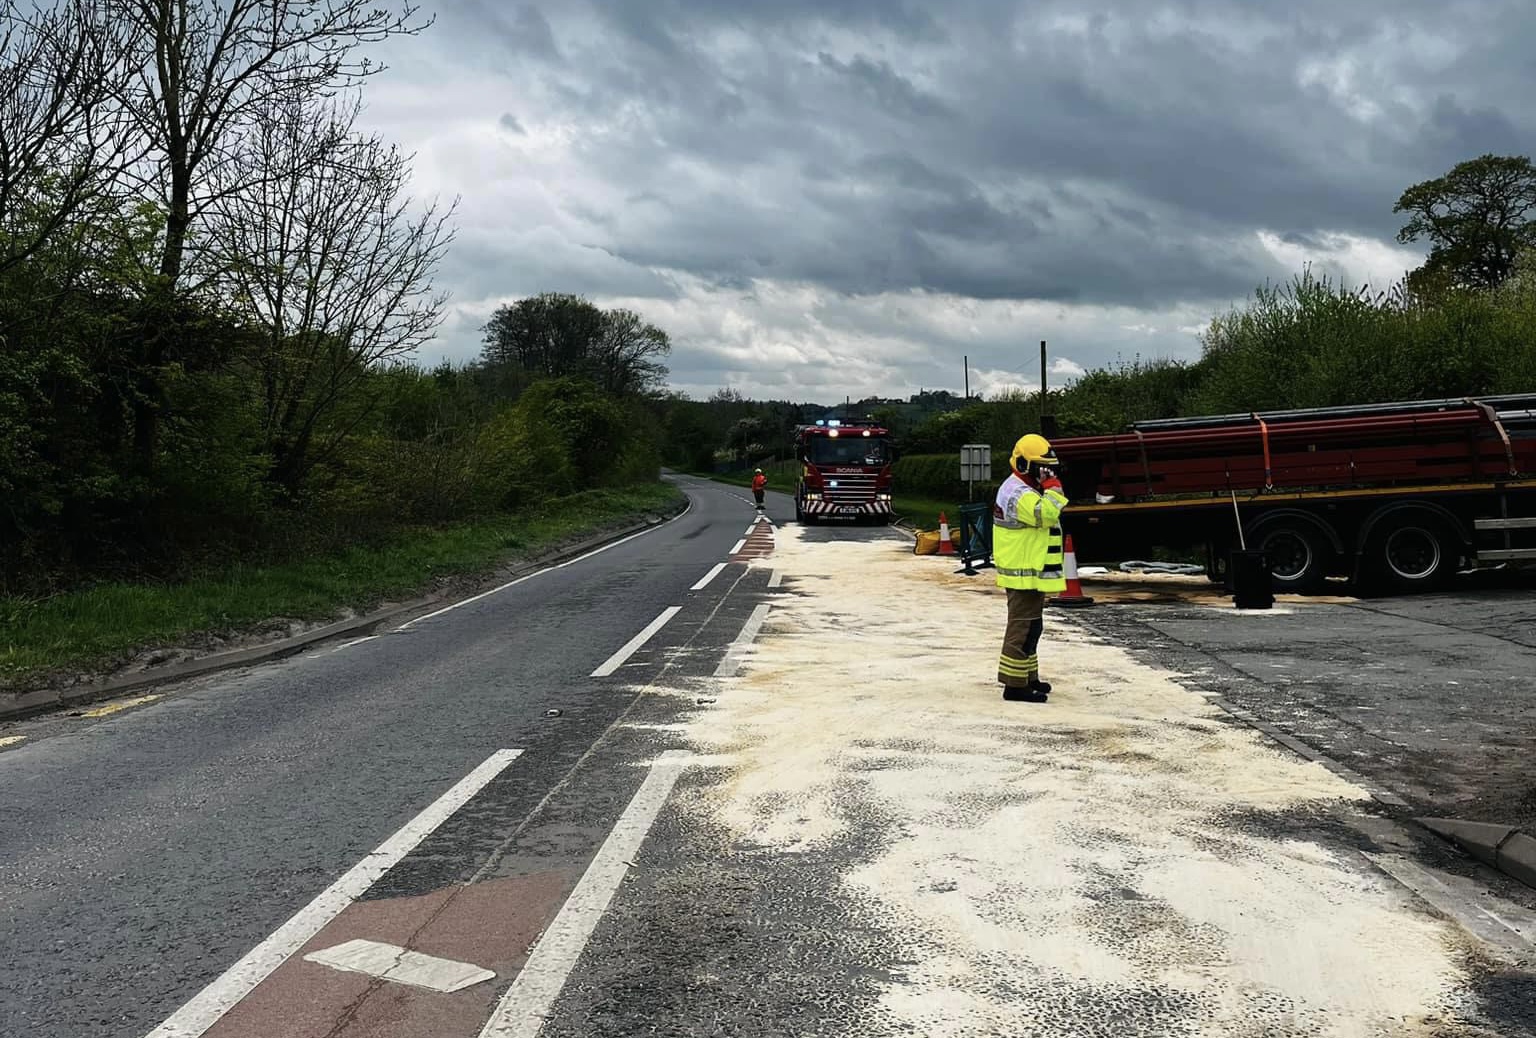 NEWS | Fire crews have been called to a large fuel spill on the A465 between Hereford and Abergavenny